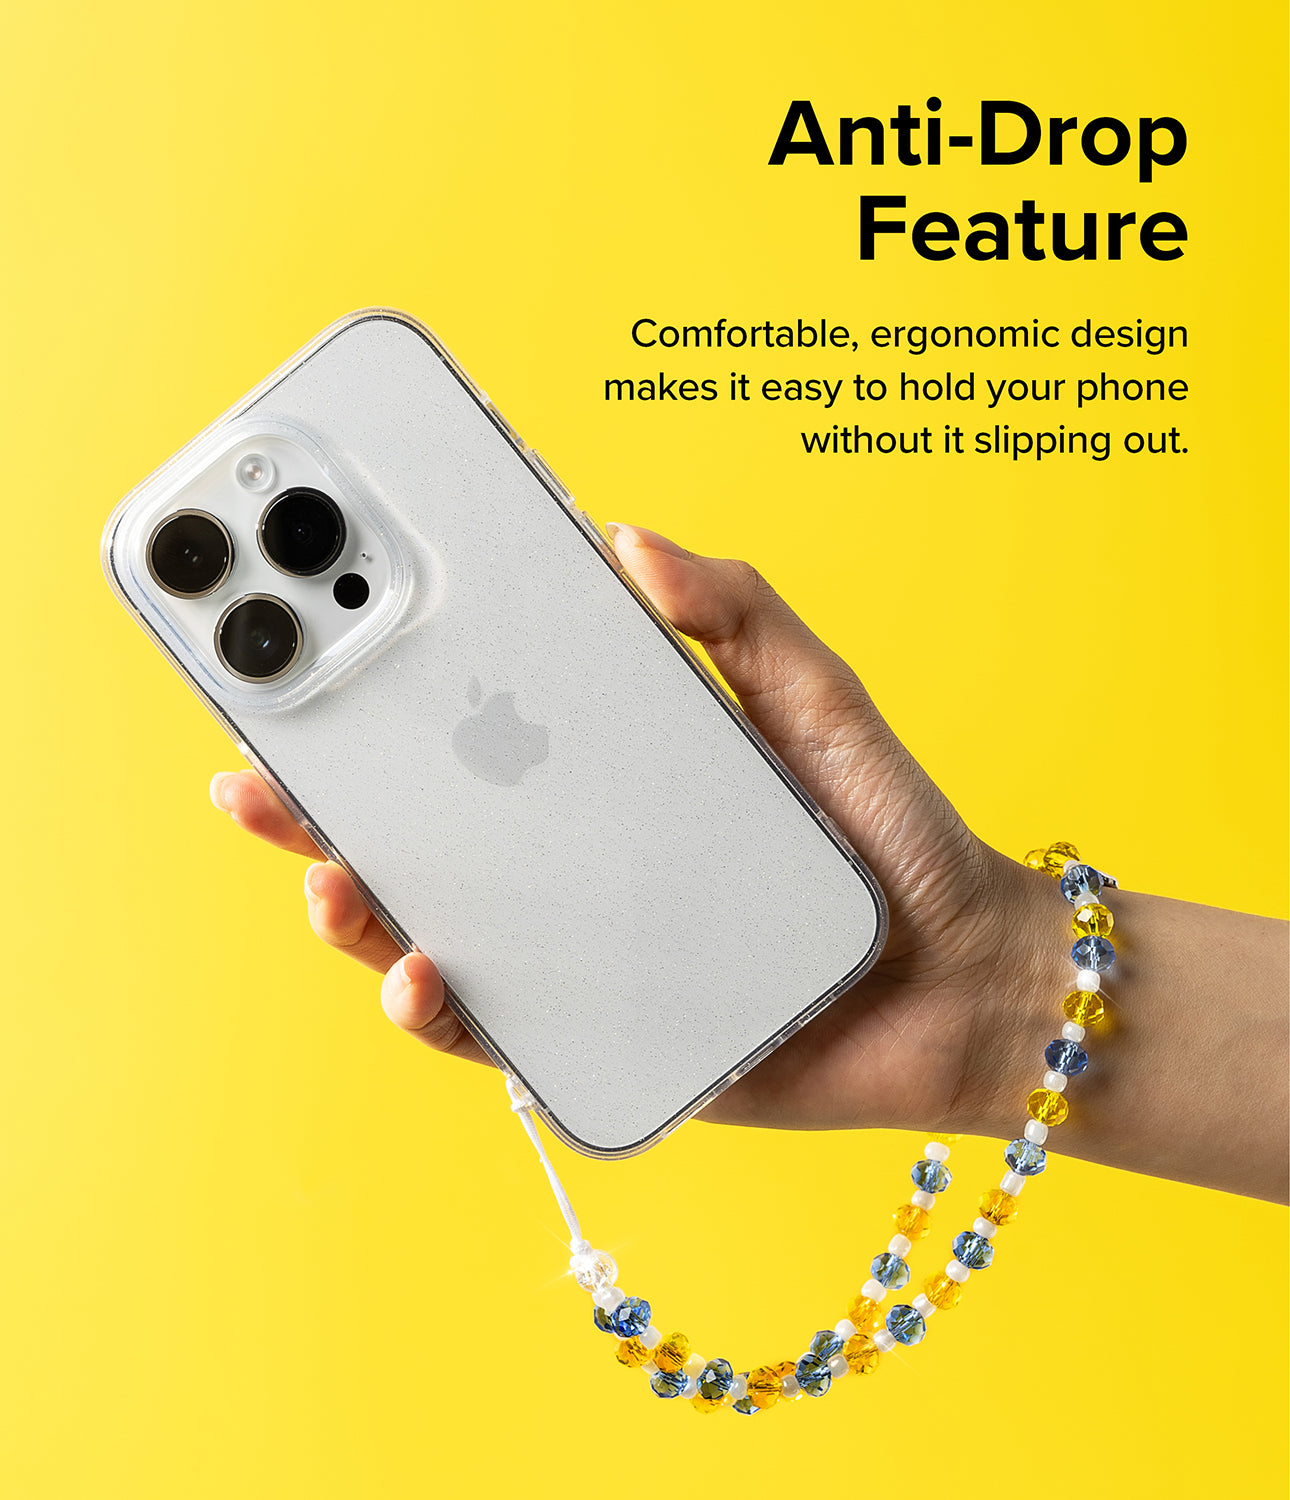 Beaded Strap - Anti-Drop Feature. Comfortable, ergonomic design makes it easy to hold your phone without it slipping out.